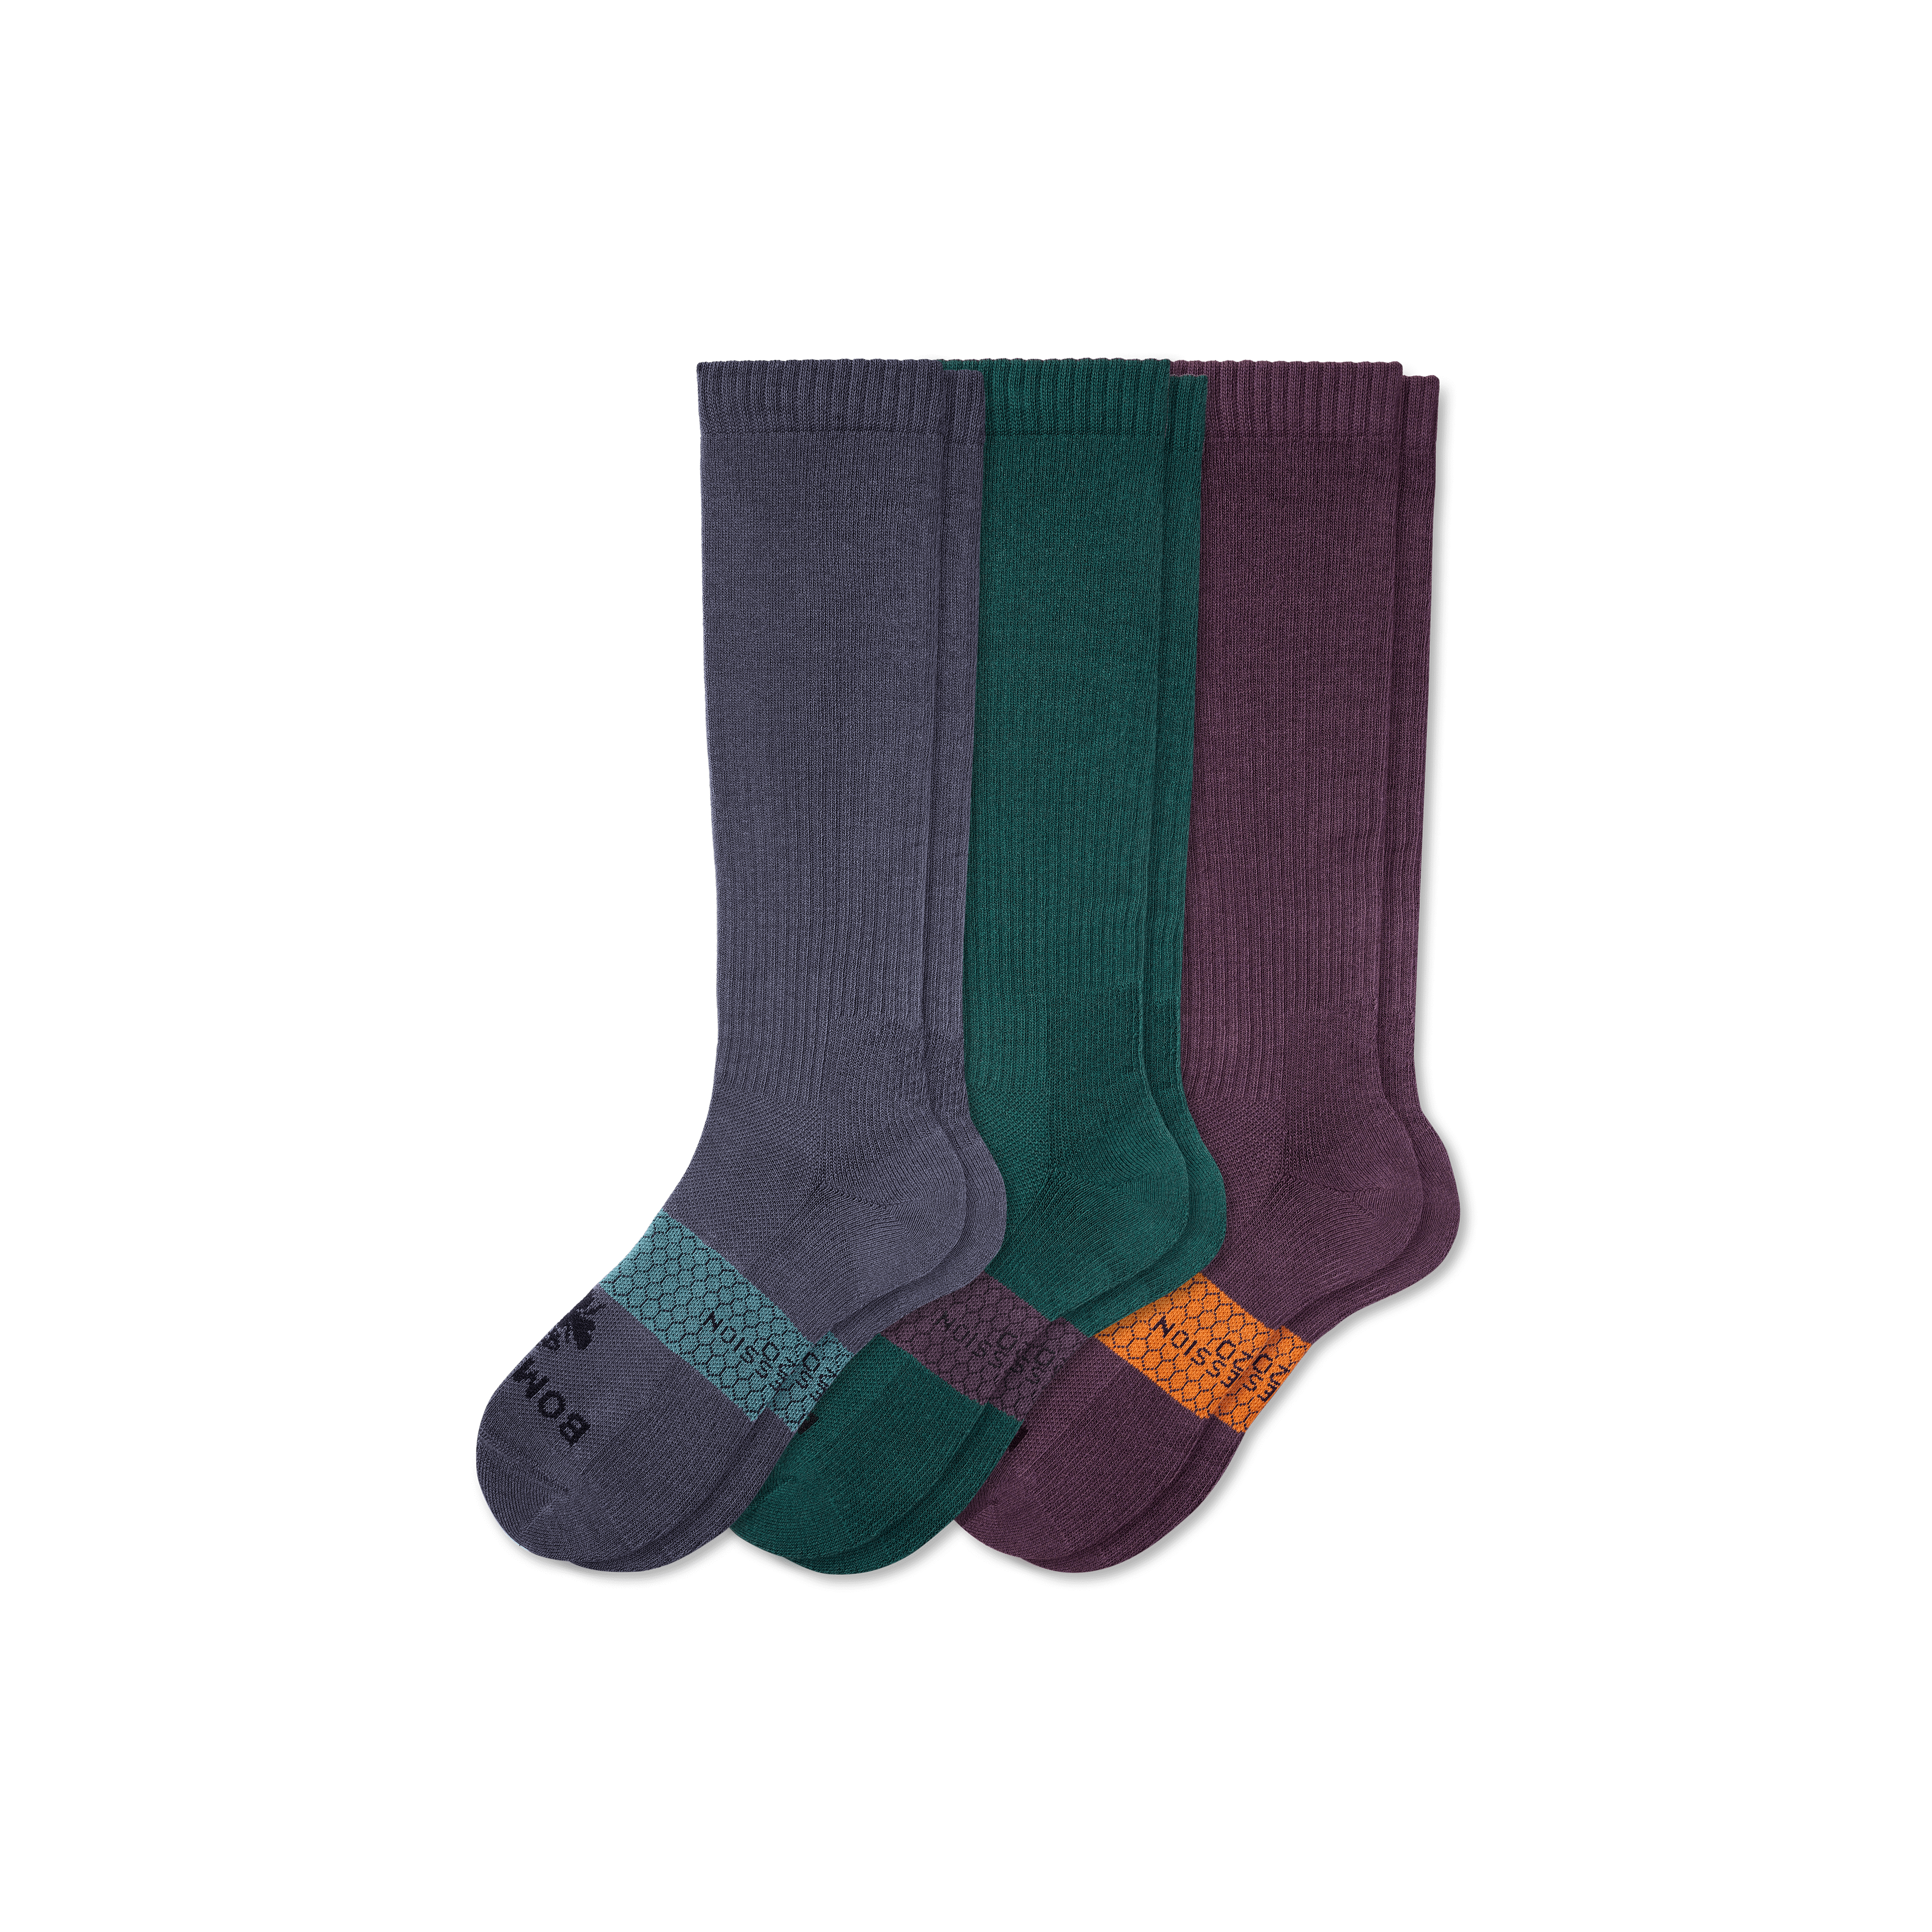 Bombas Everyday Compression Sock 3-pack (15-20mmhg) In Galaxy Teal Mix